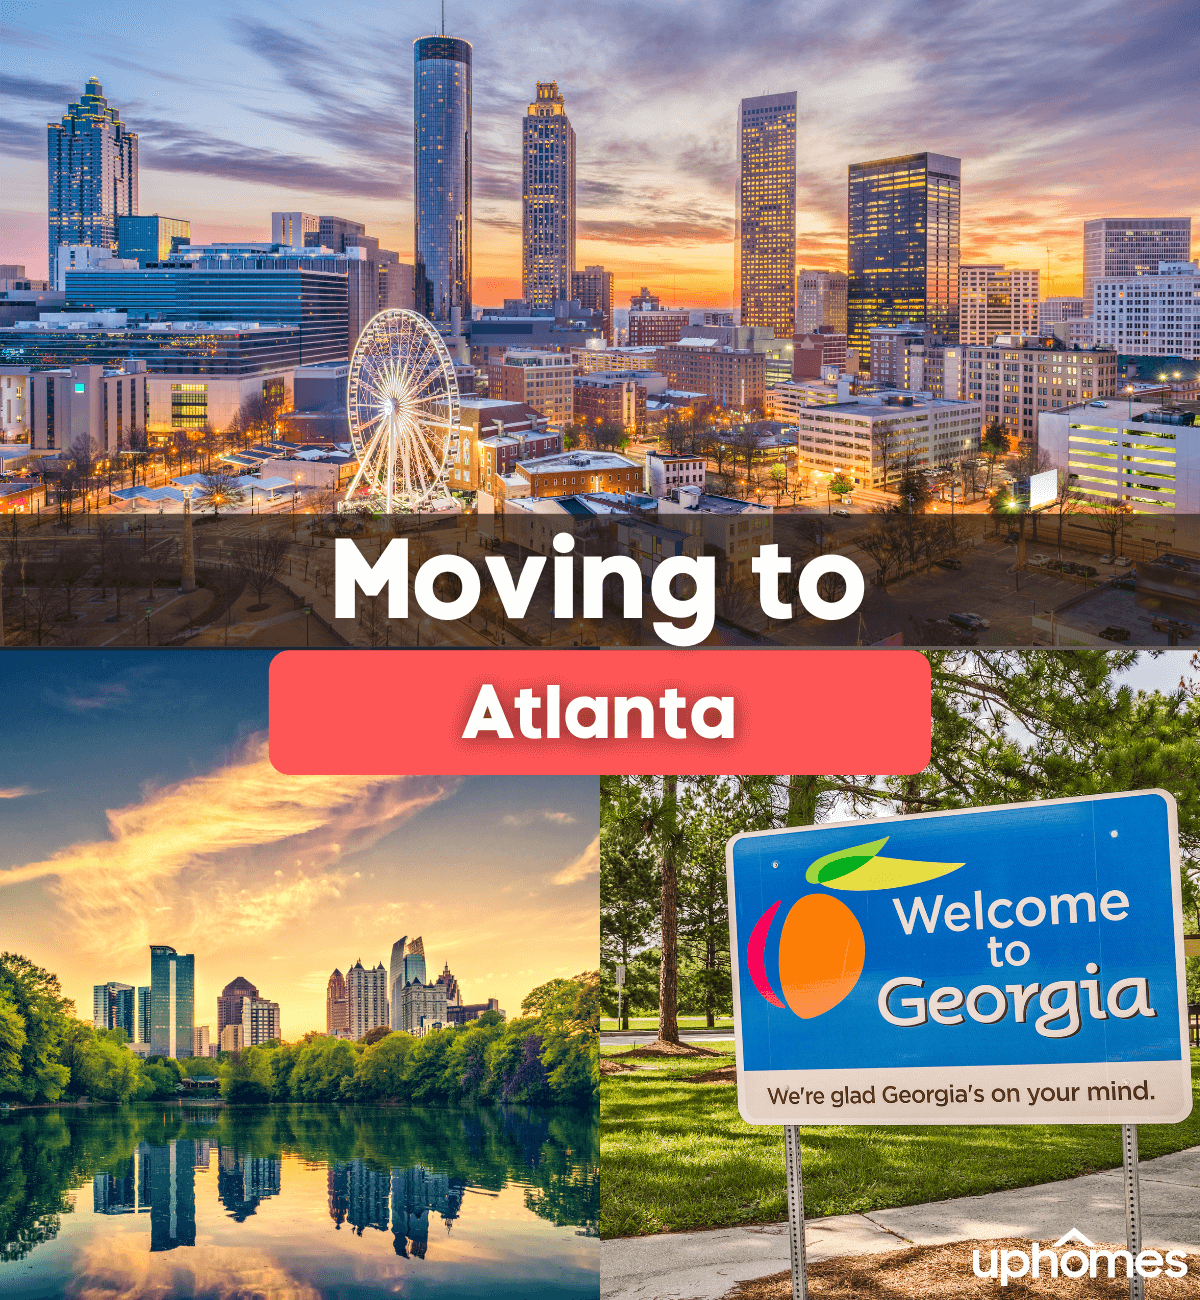 Moving to Atlanta - Find out what it is like living in Atlanta, GA?